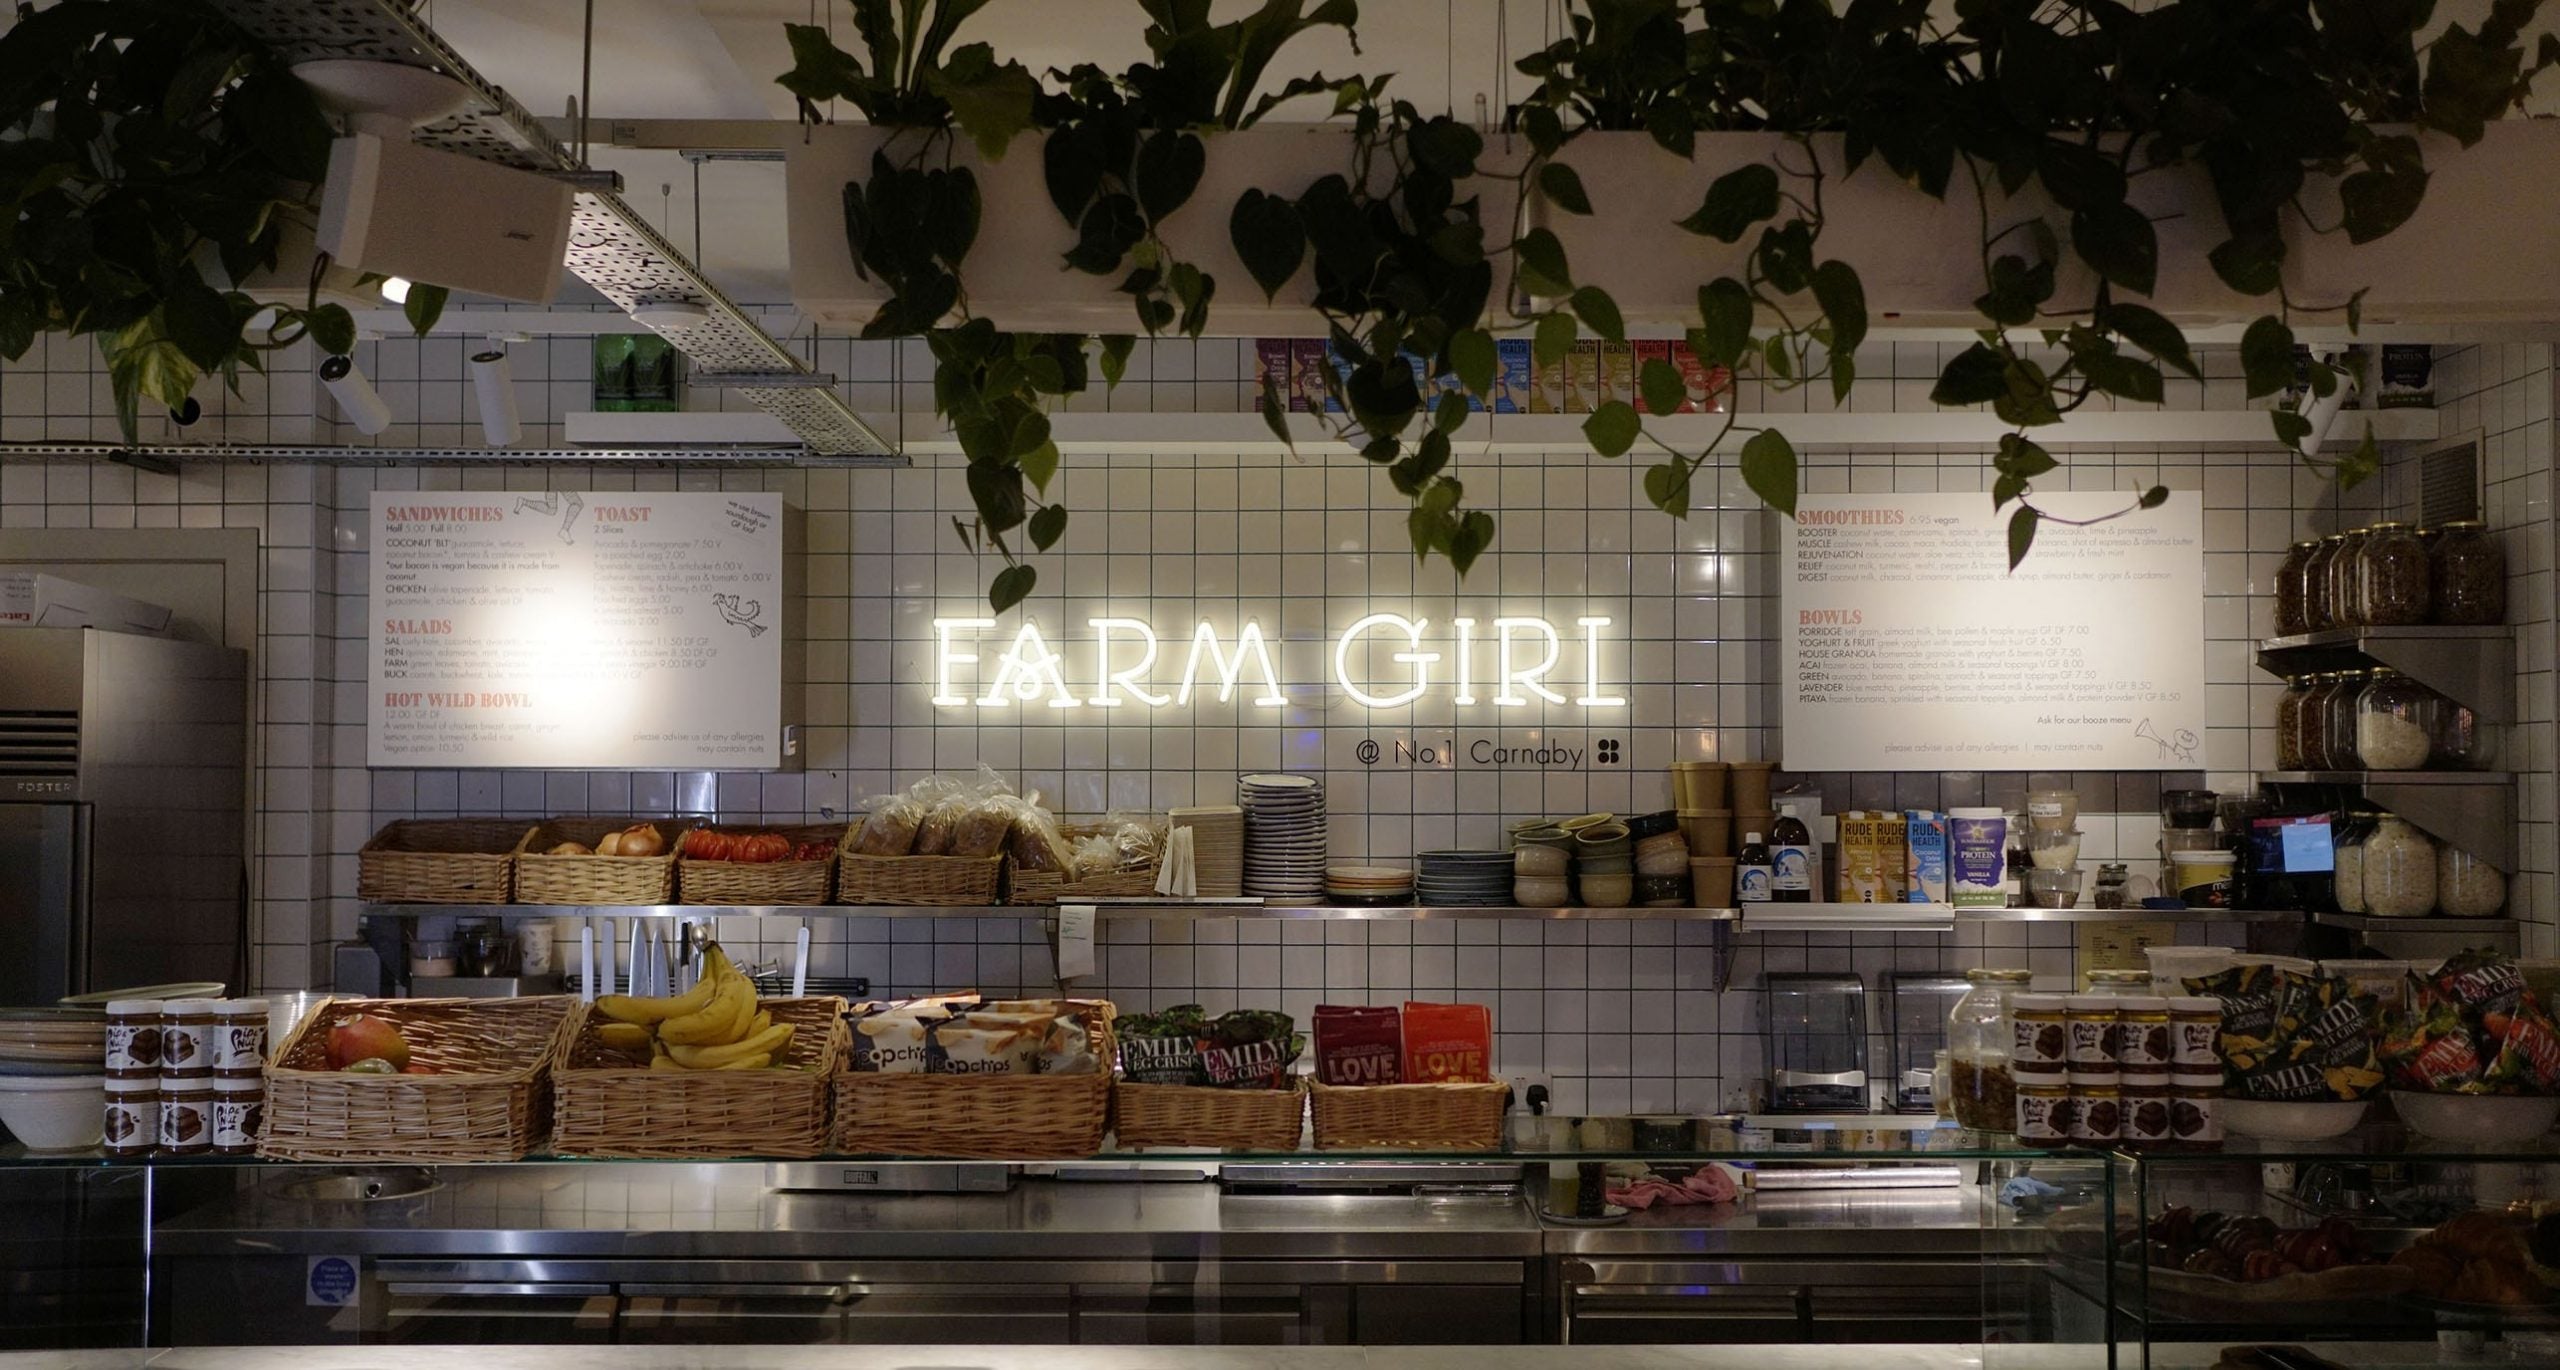 Why We Love Farm Girl, The Holistic Cafe With A Conscience